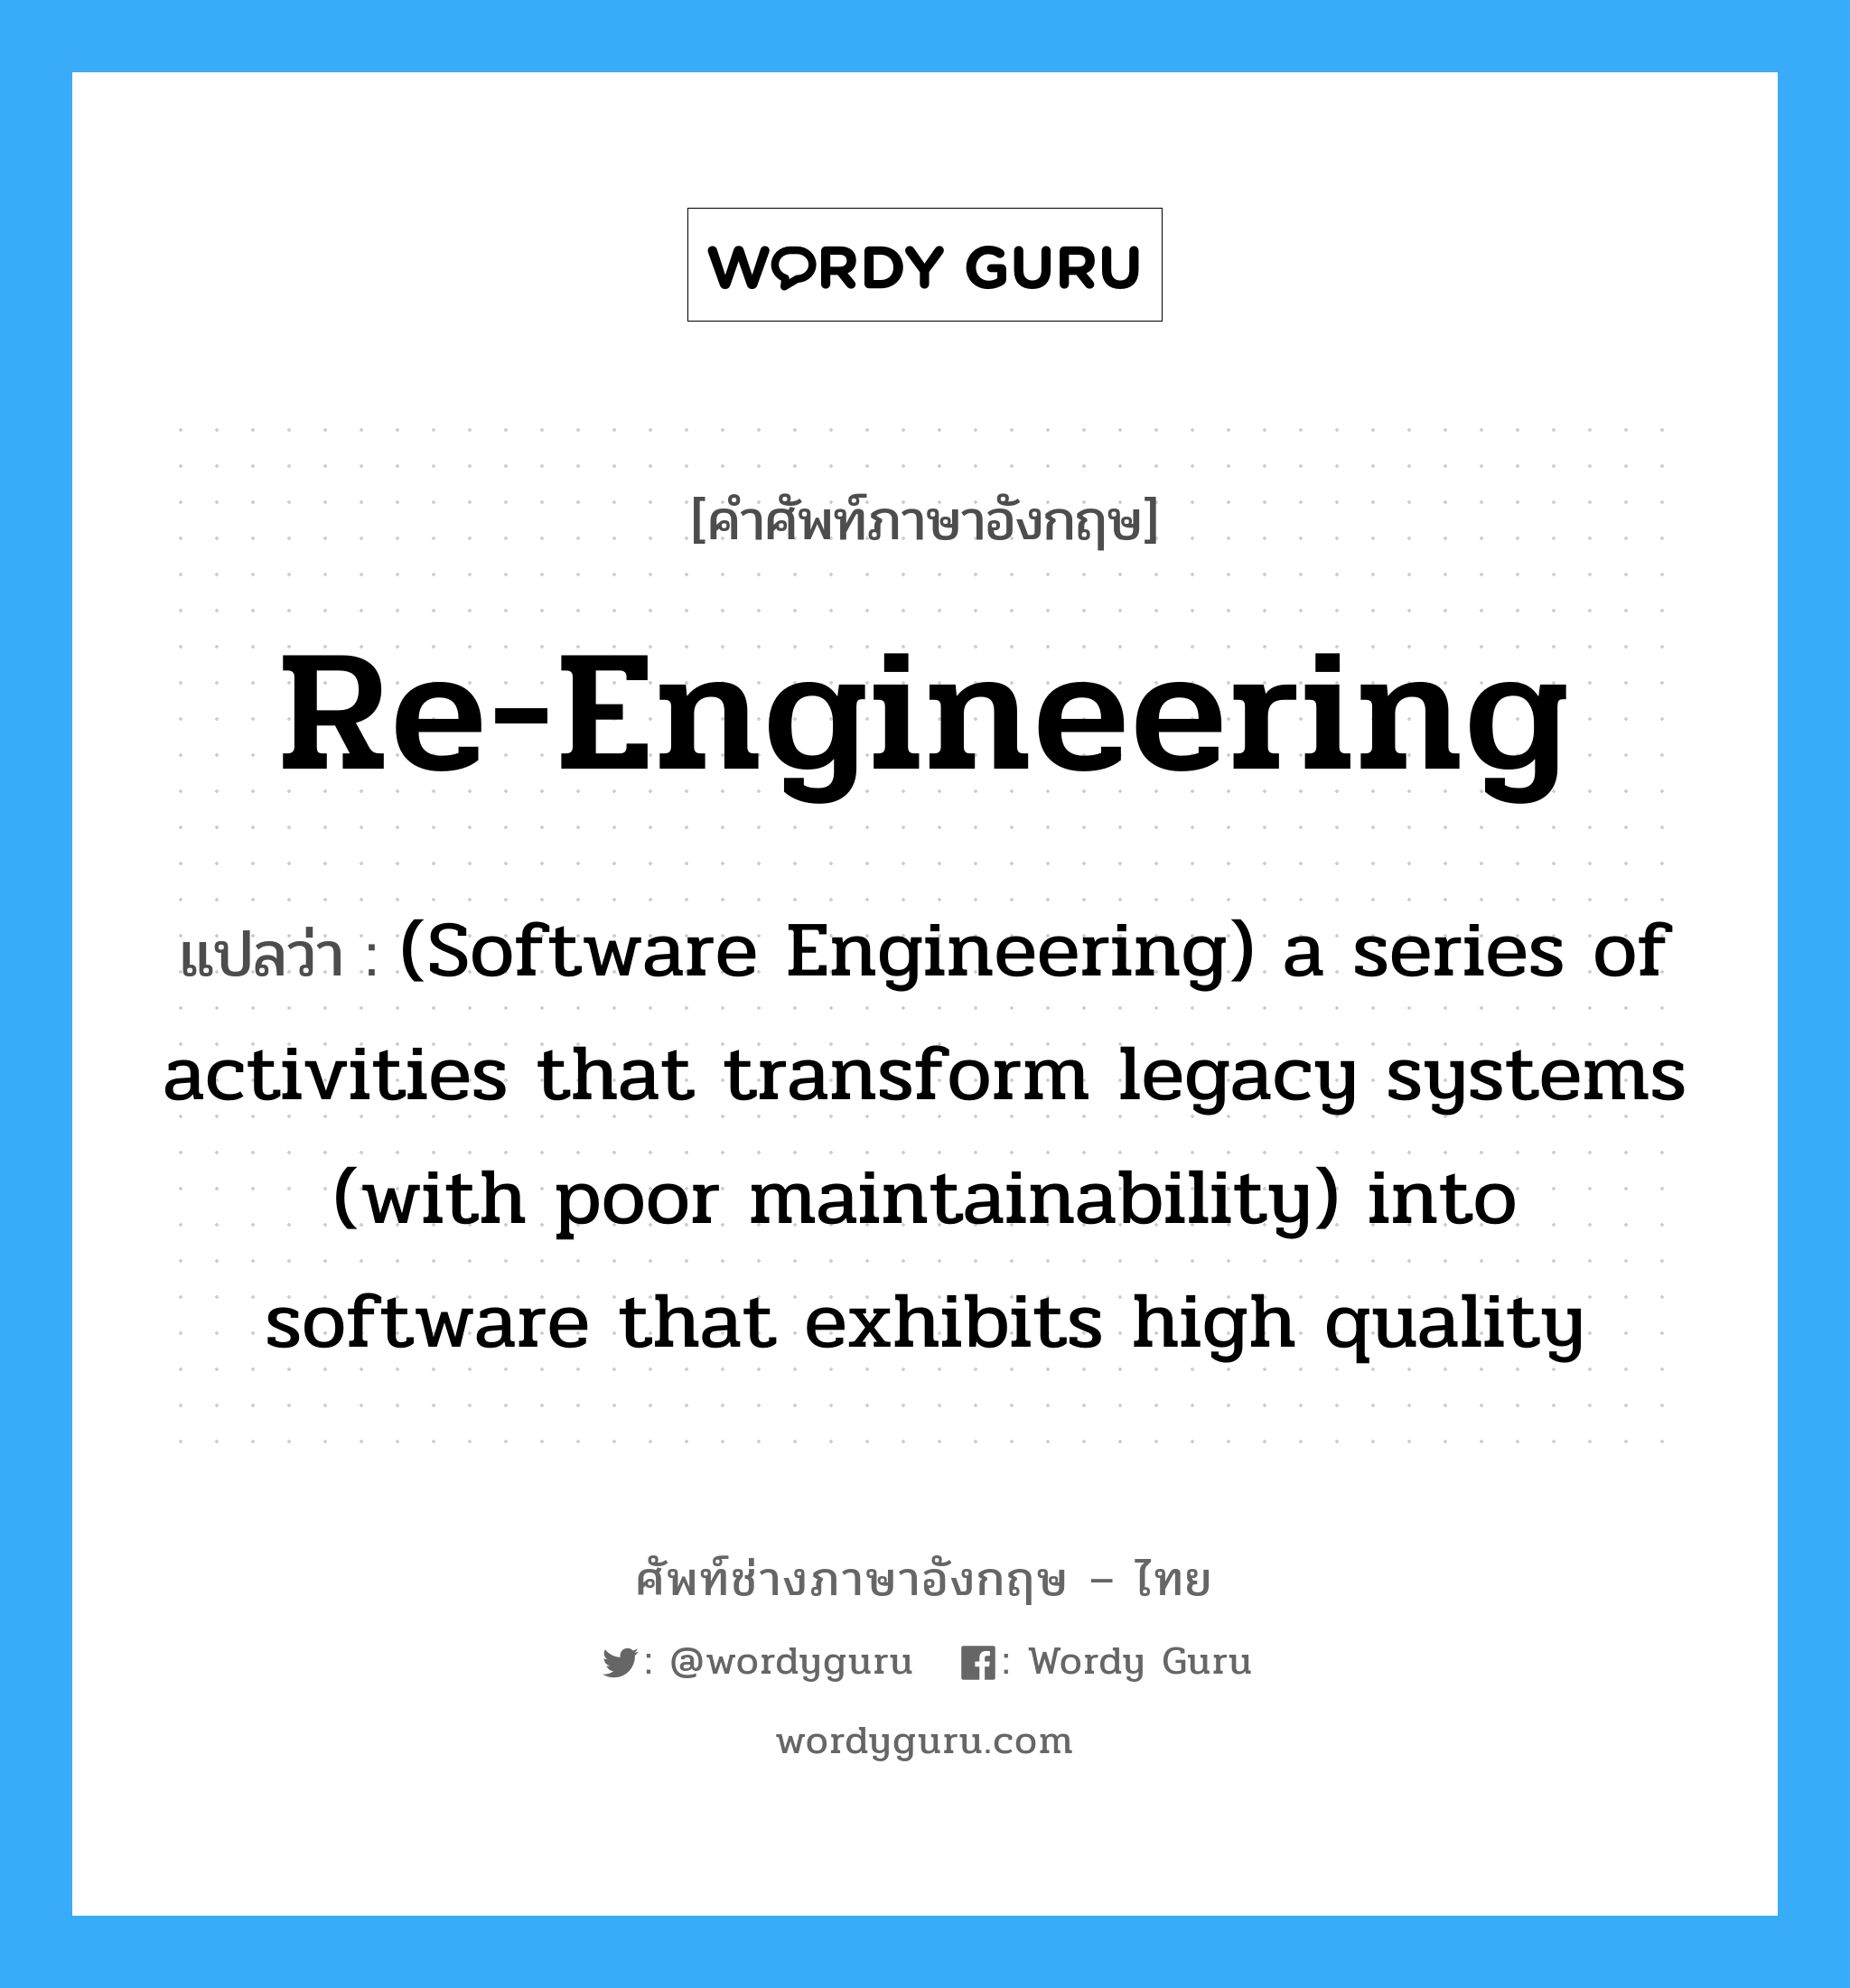 Re-engineering แปลว่า?, คำศัพท์ช่างภาษาอังกฤษ - ไทย Re-engineering คำศัพท์ภาษาอังกฤษ Re-engineering แปลว่า (Software Engineering) a series of activities that transform legacy systems (with poor maintainability) into software that exhibits high quality